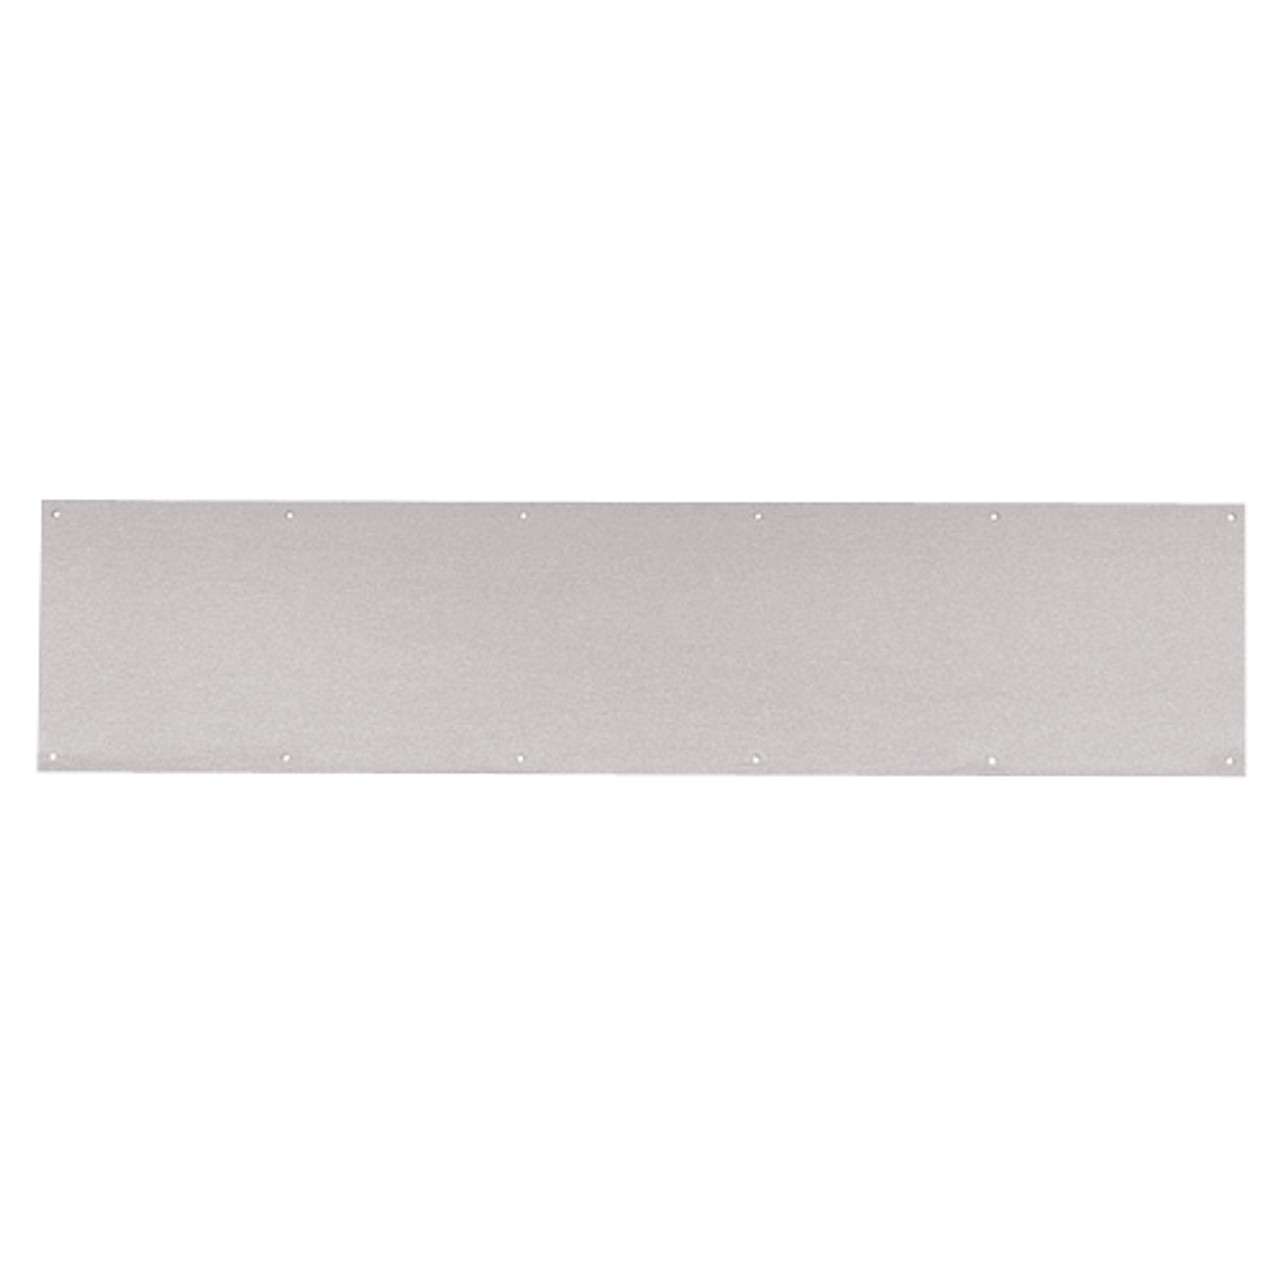 8400-US32D-34x41-B-CS Ives 8400 Series Protection Plate in Satin Stainless Steel